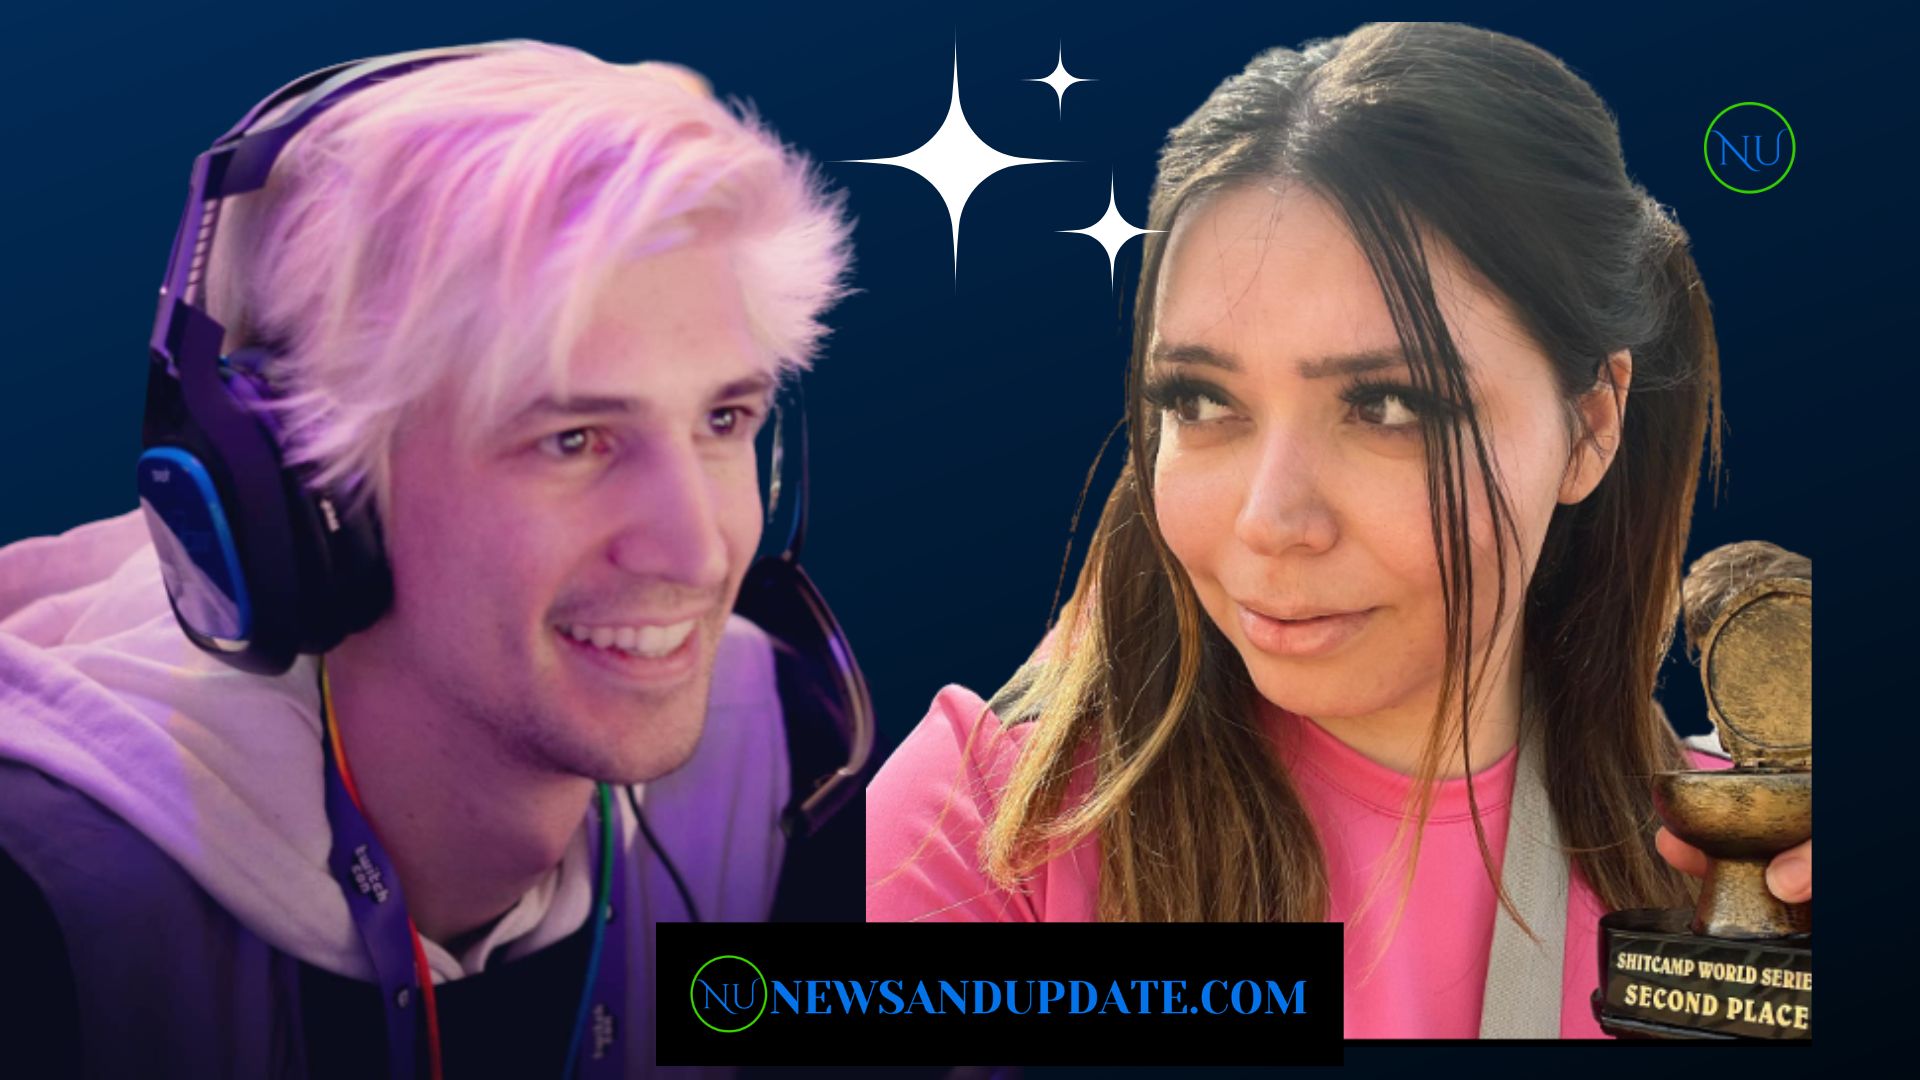 xQc Has Broken Up With Girlfriend Adept Again - Here Are The Details!